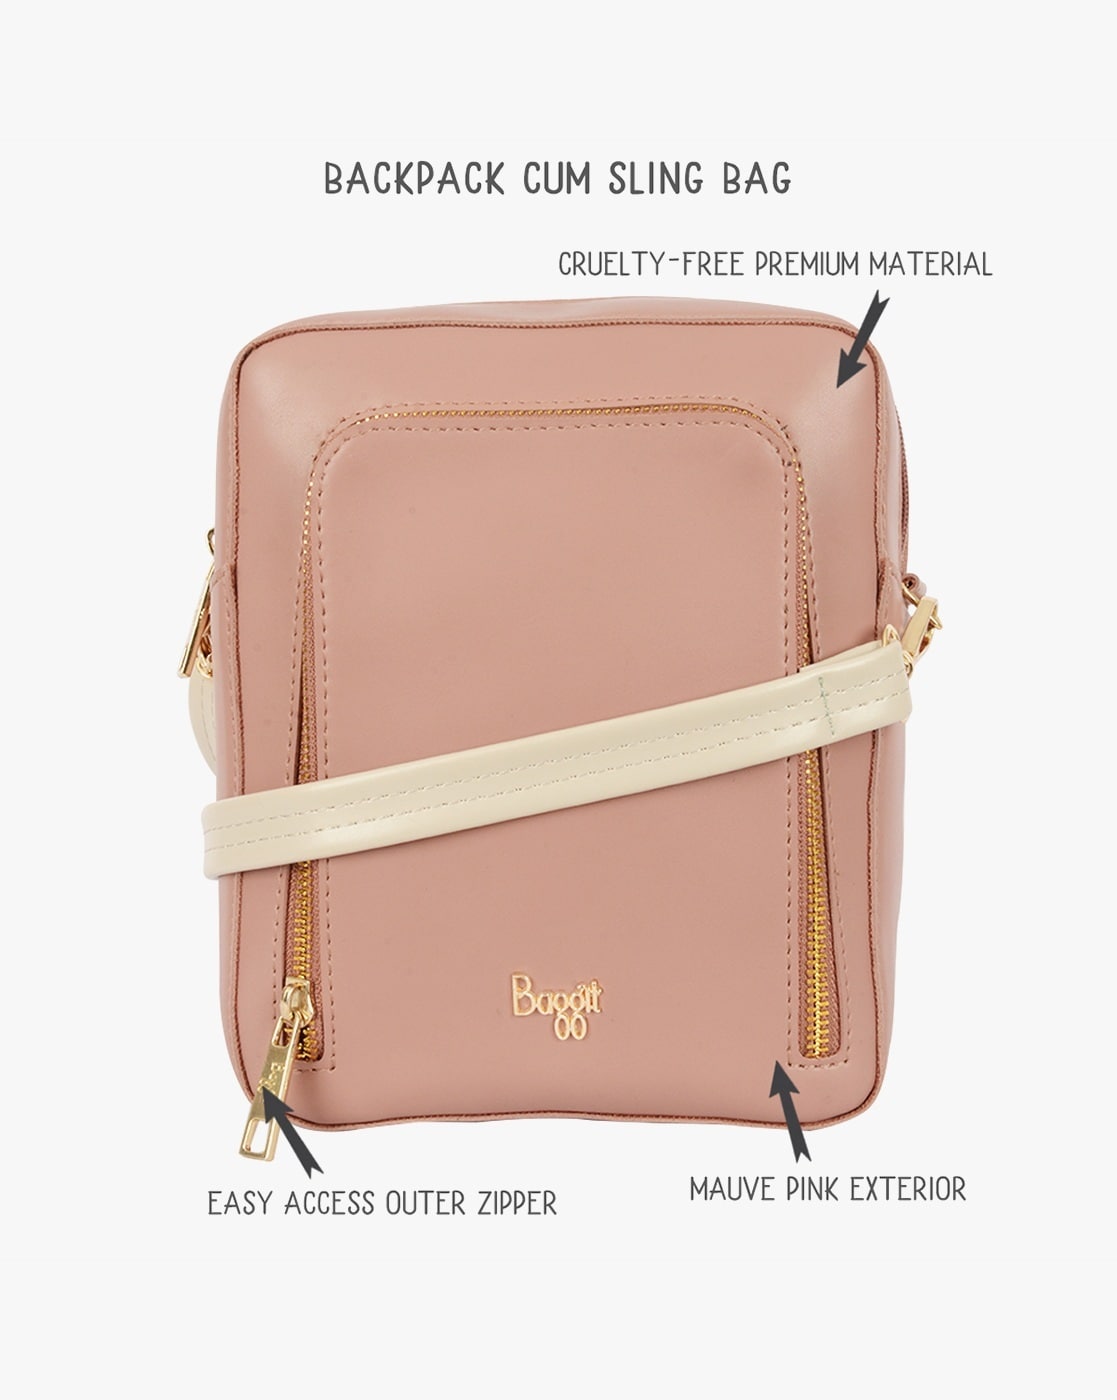 Baggit - How will you style this bag? a. Casuals b. Formals Fetch  compliments for your style by carrying this functional backpack G SPIRAL by  Baggit which has ample room to accommodate